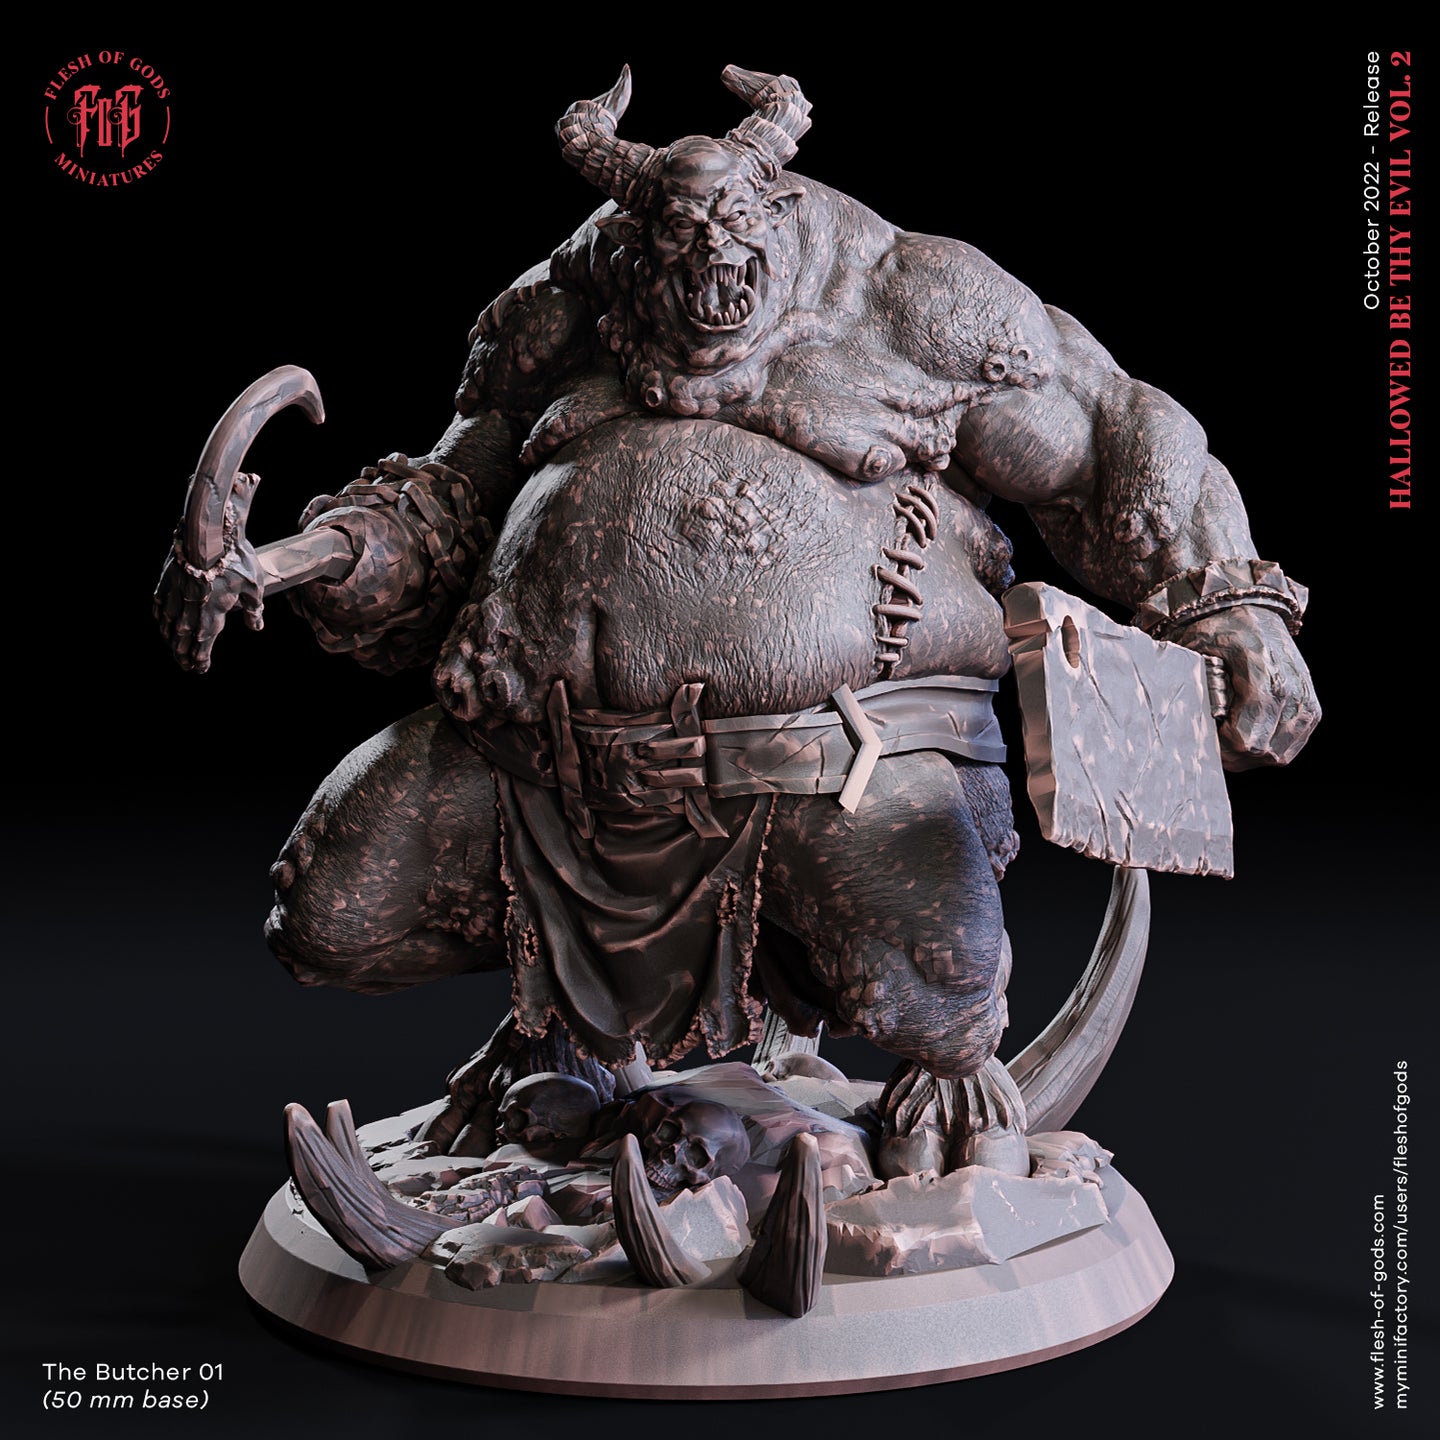 The Butcher 1 - Hallowed By Thy Evil Vol. 2  - Flesh of Gods - Wargaming D&D DnD